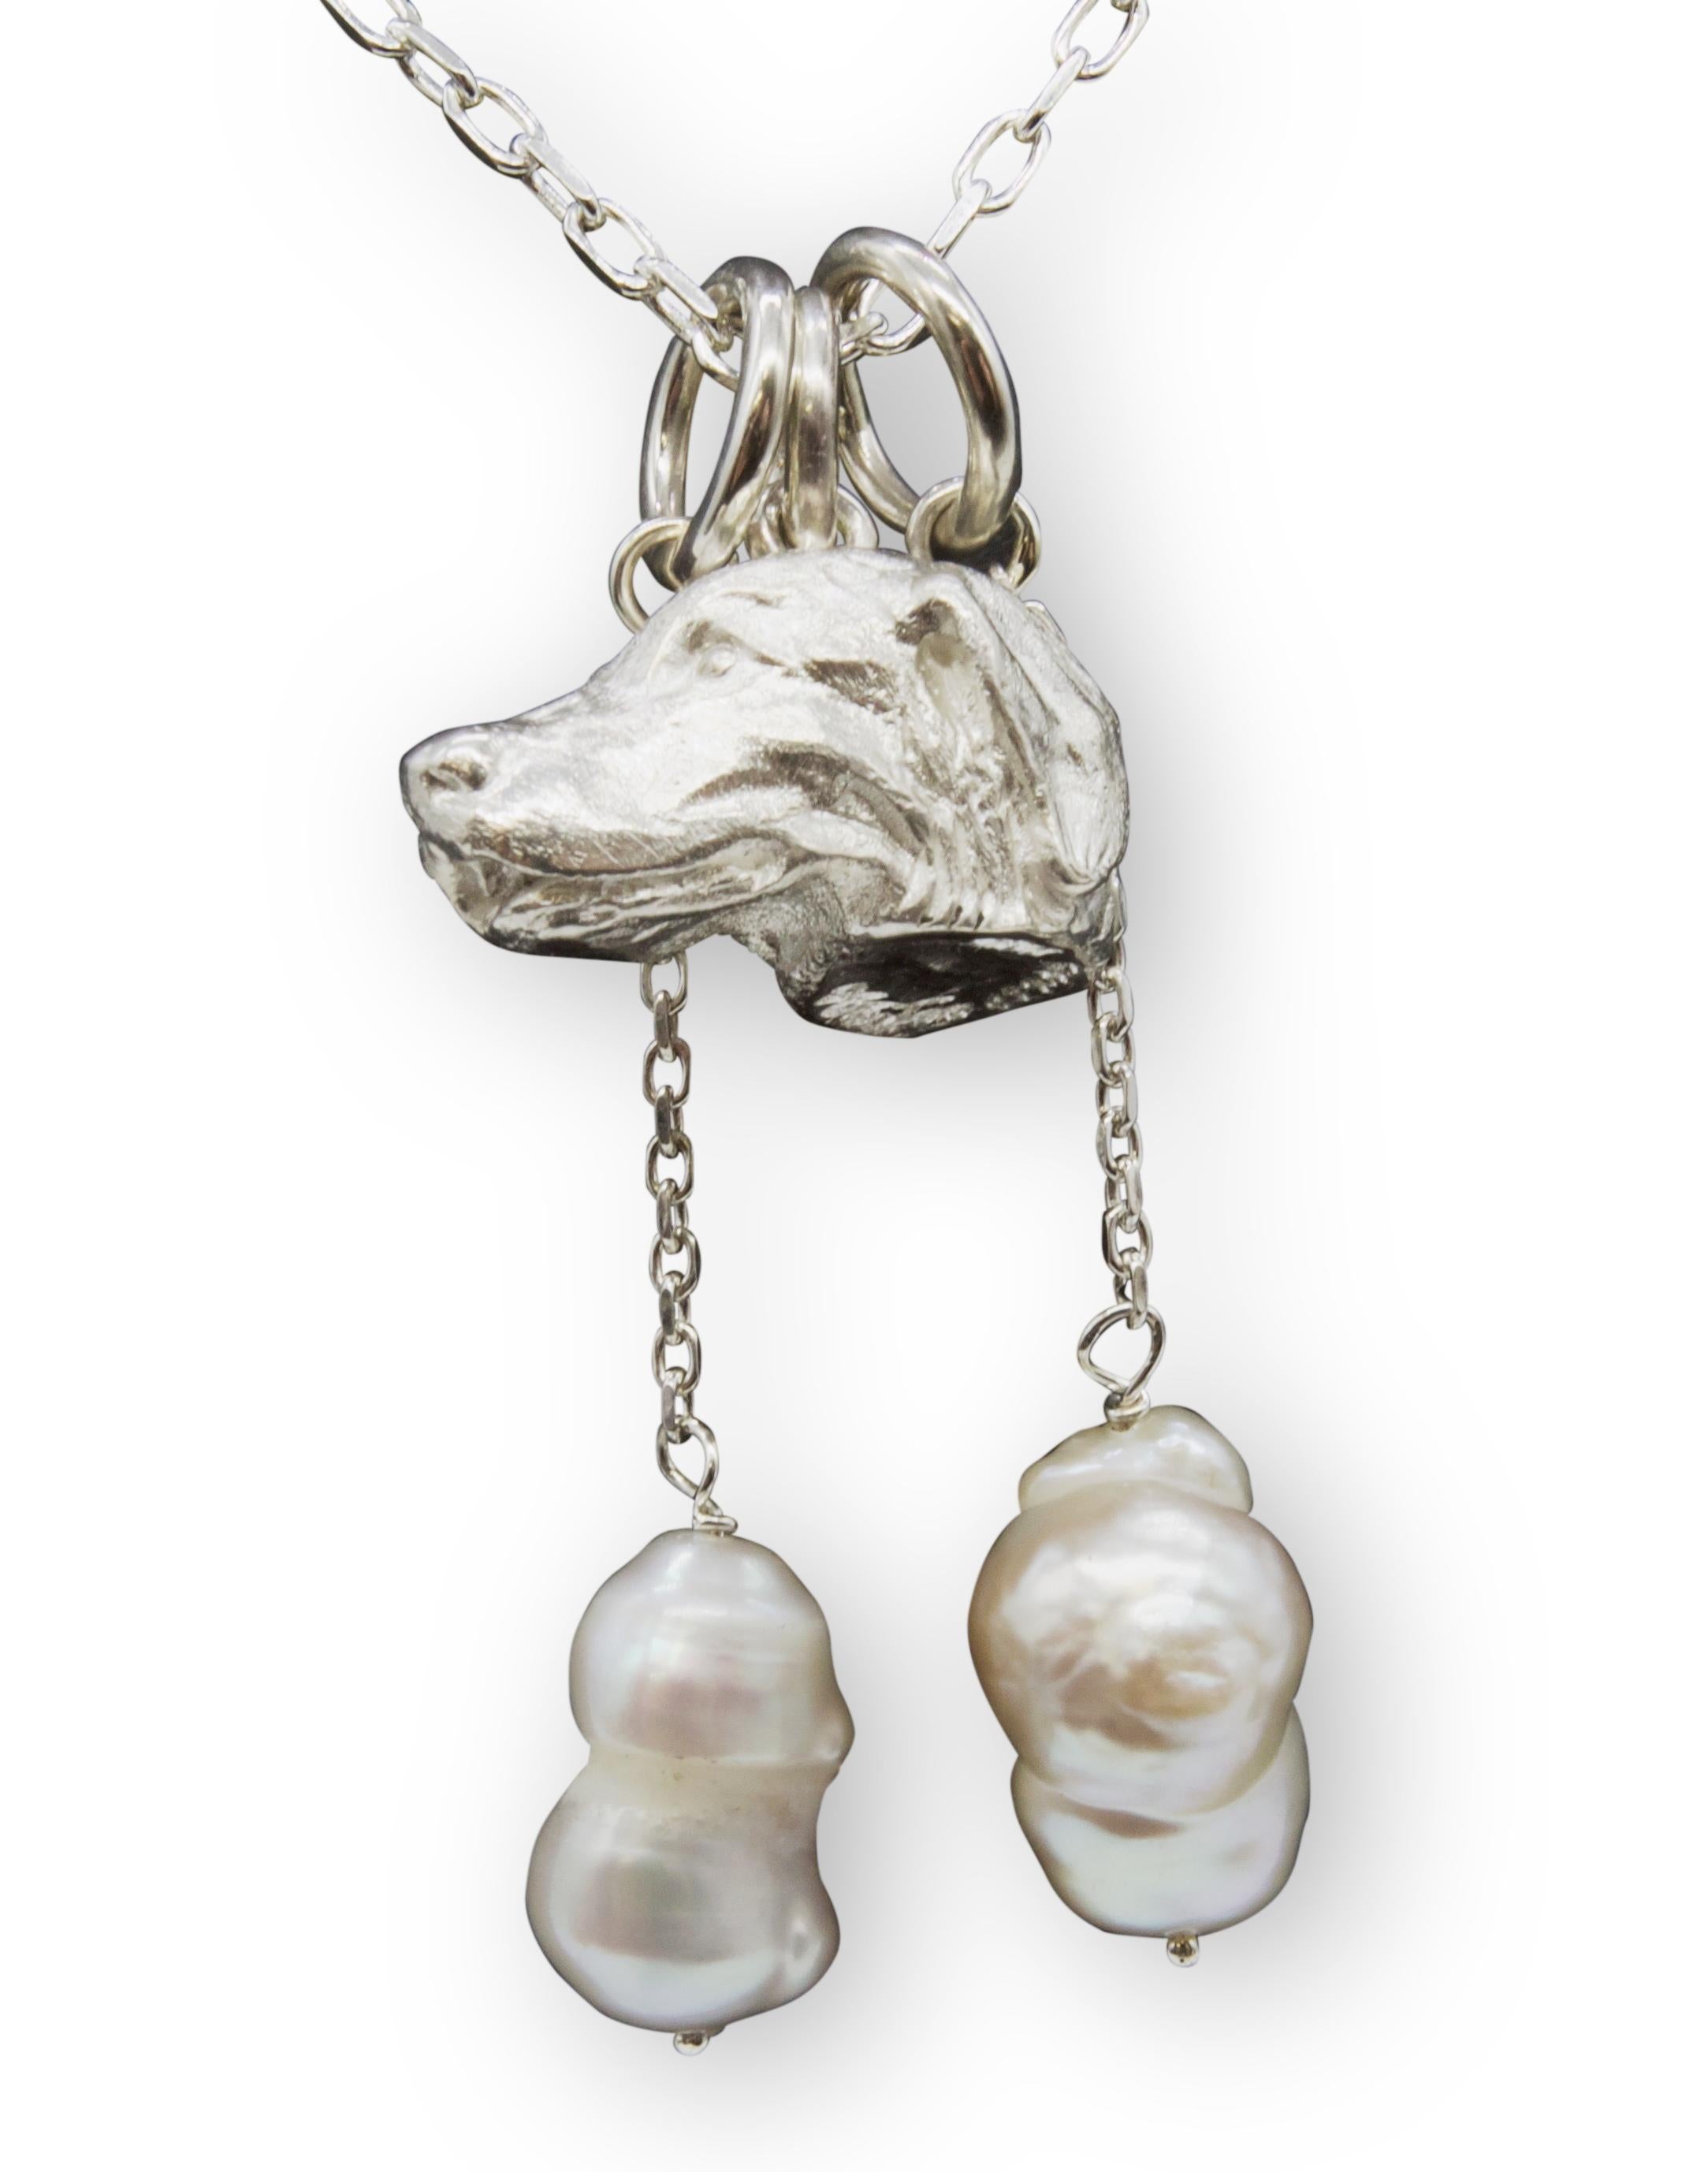 Paul Eaton Sculpted Miniature Labrador Head in Sterling Silver Charm or Pendant  For Sale 1